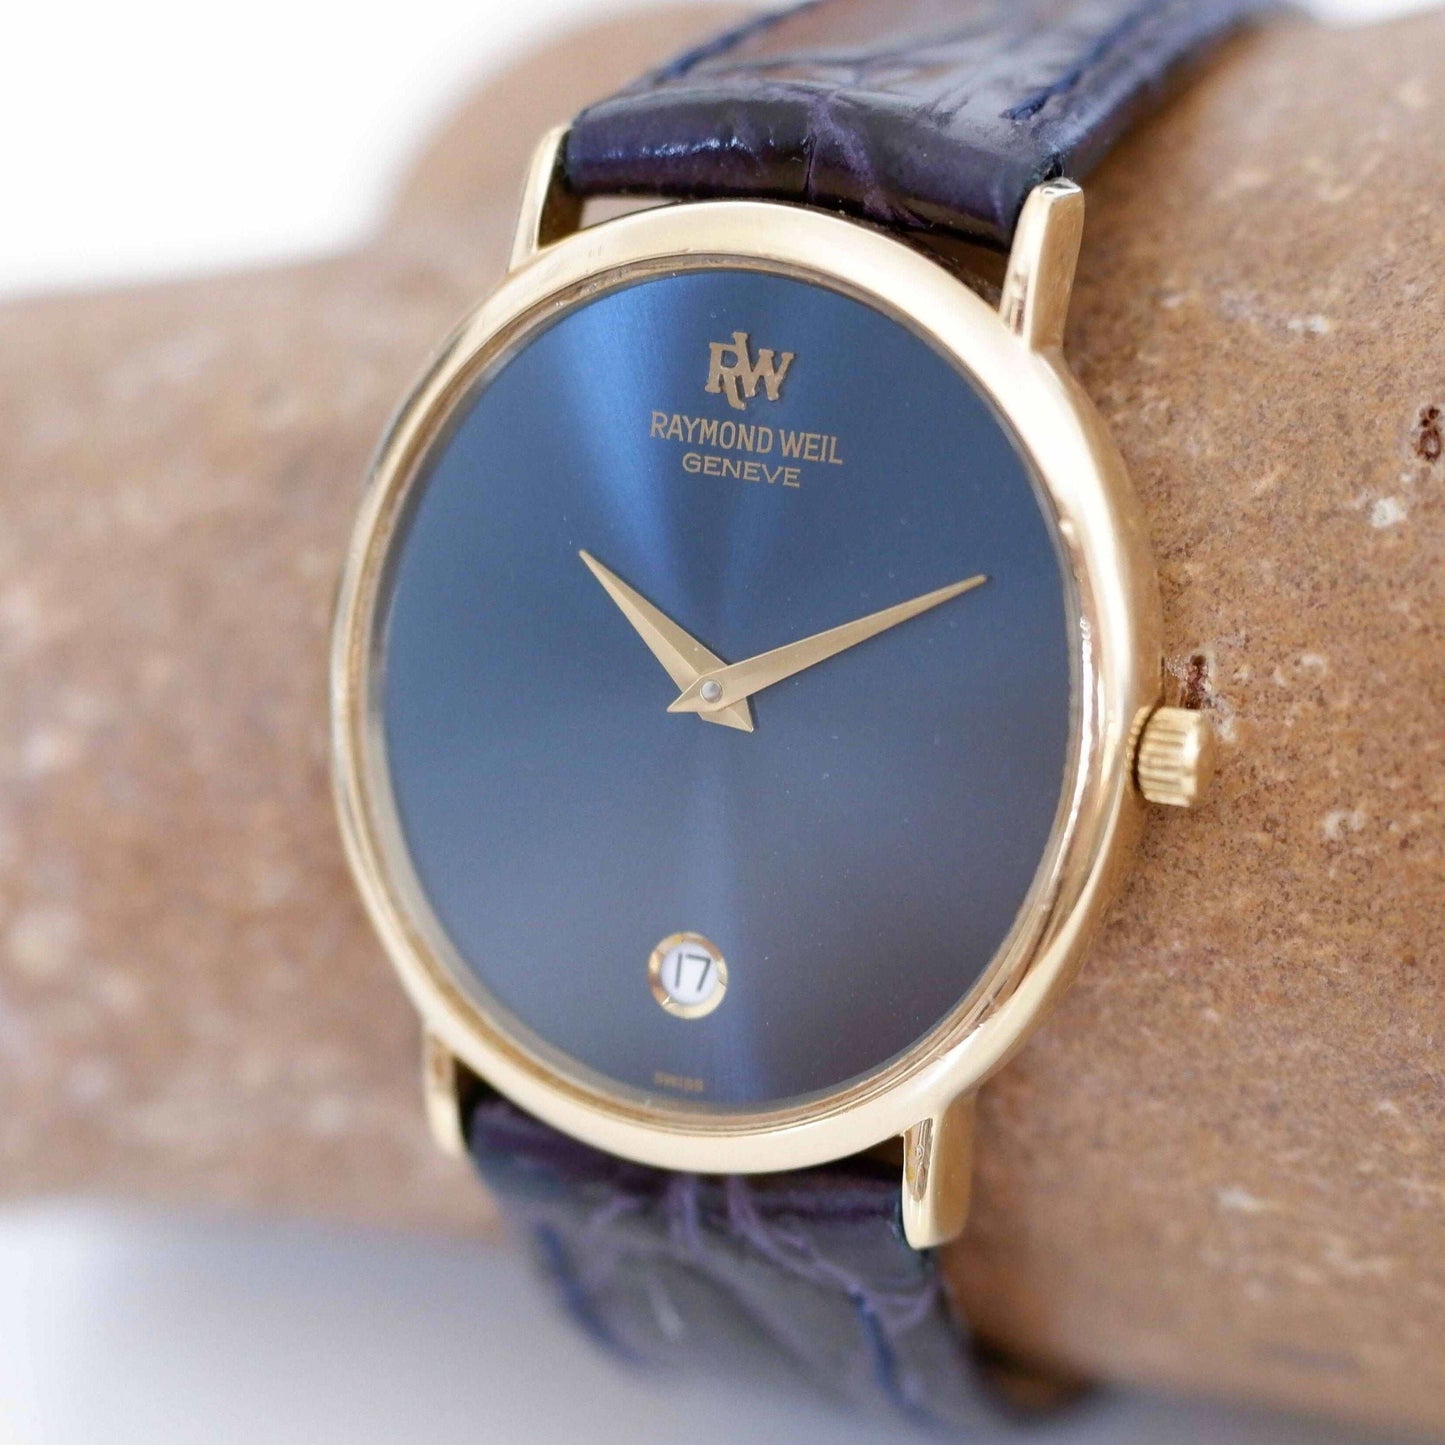 Raymond Weil Vintage Ladies Watch: 90s Golden Oval Style with Blue Sunburst Dial, Slight Right Side